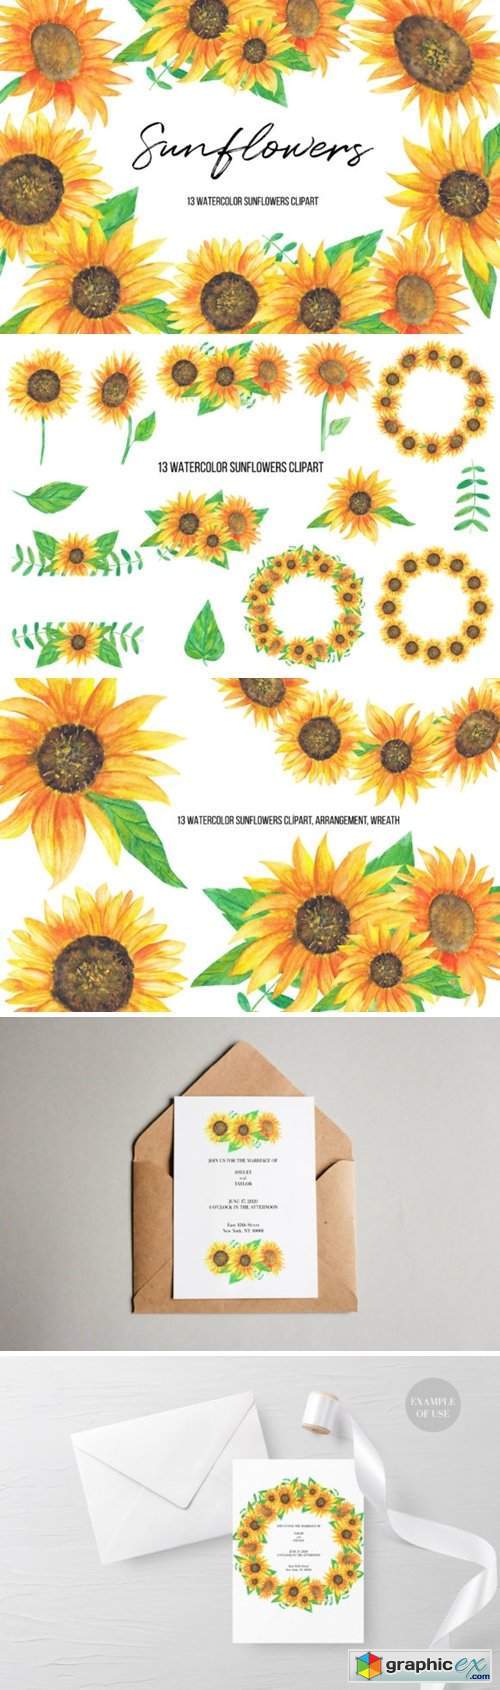 Watercolor Sunflowers Clipart